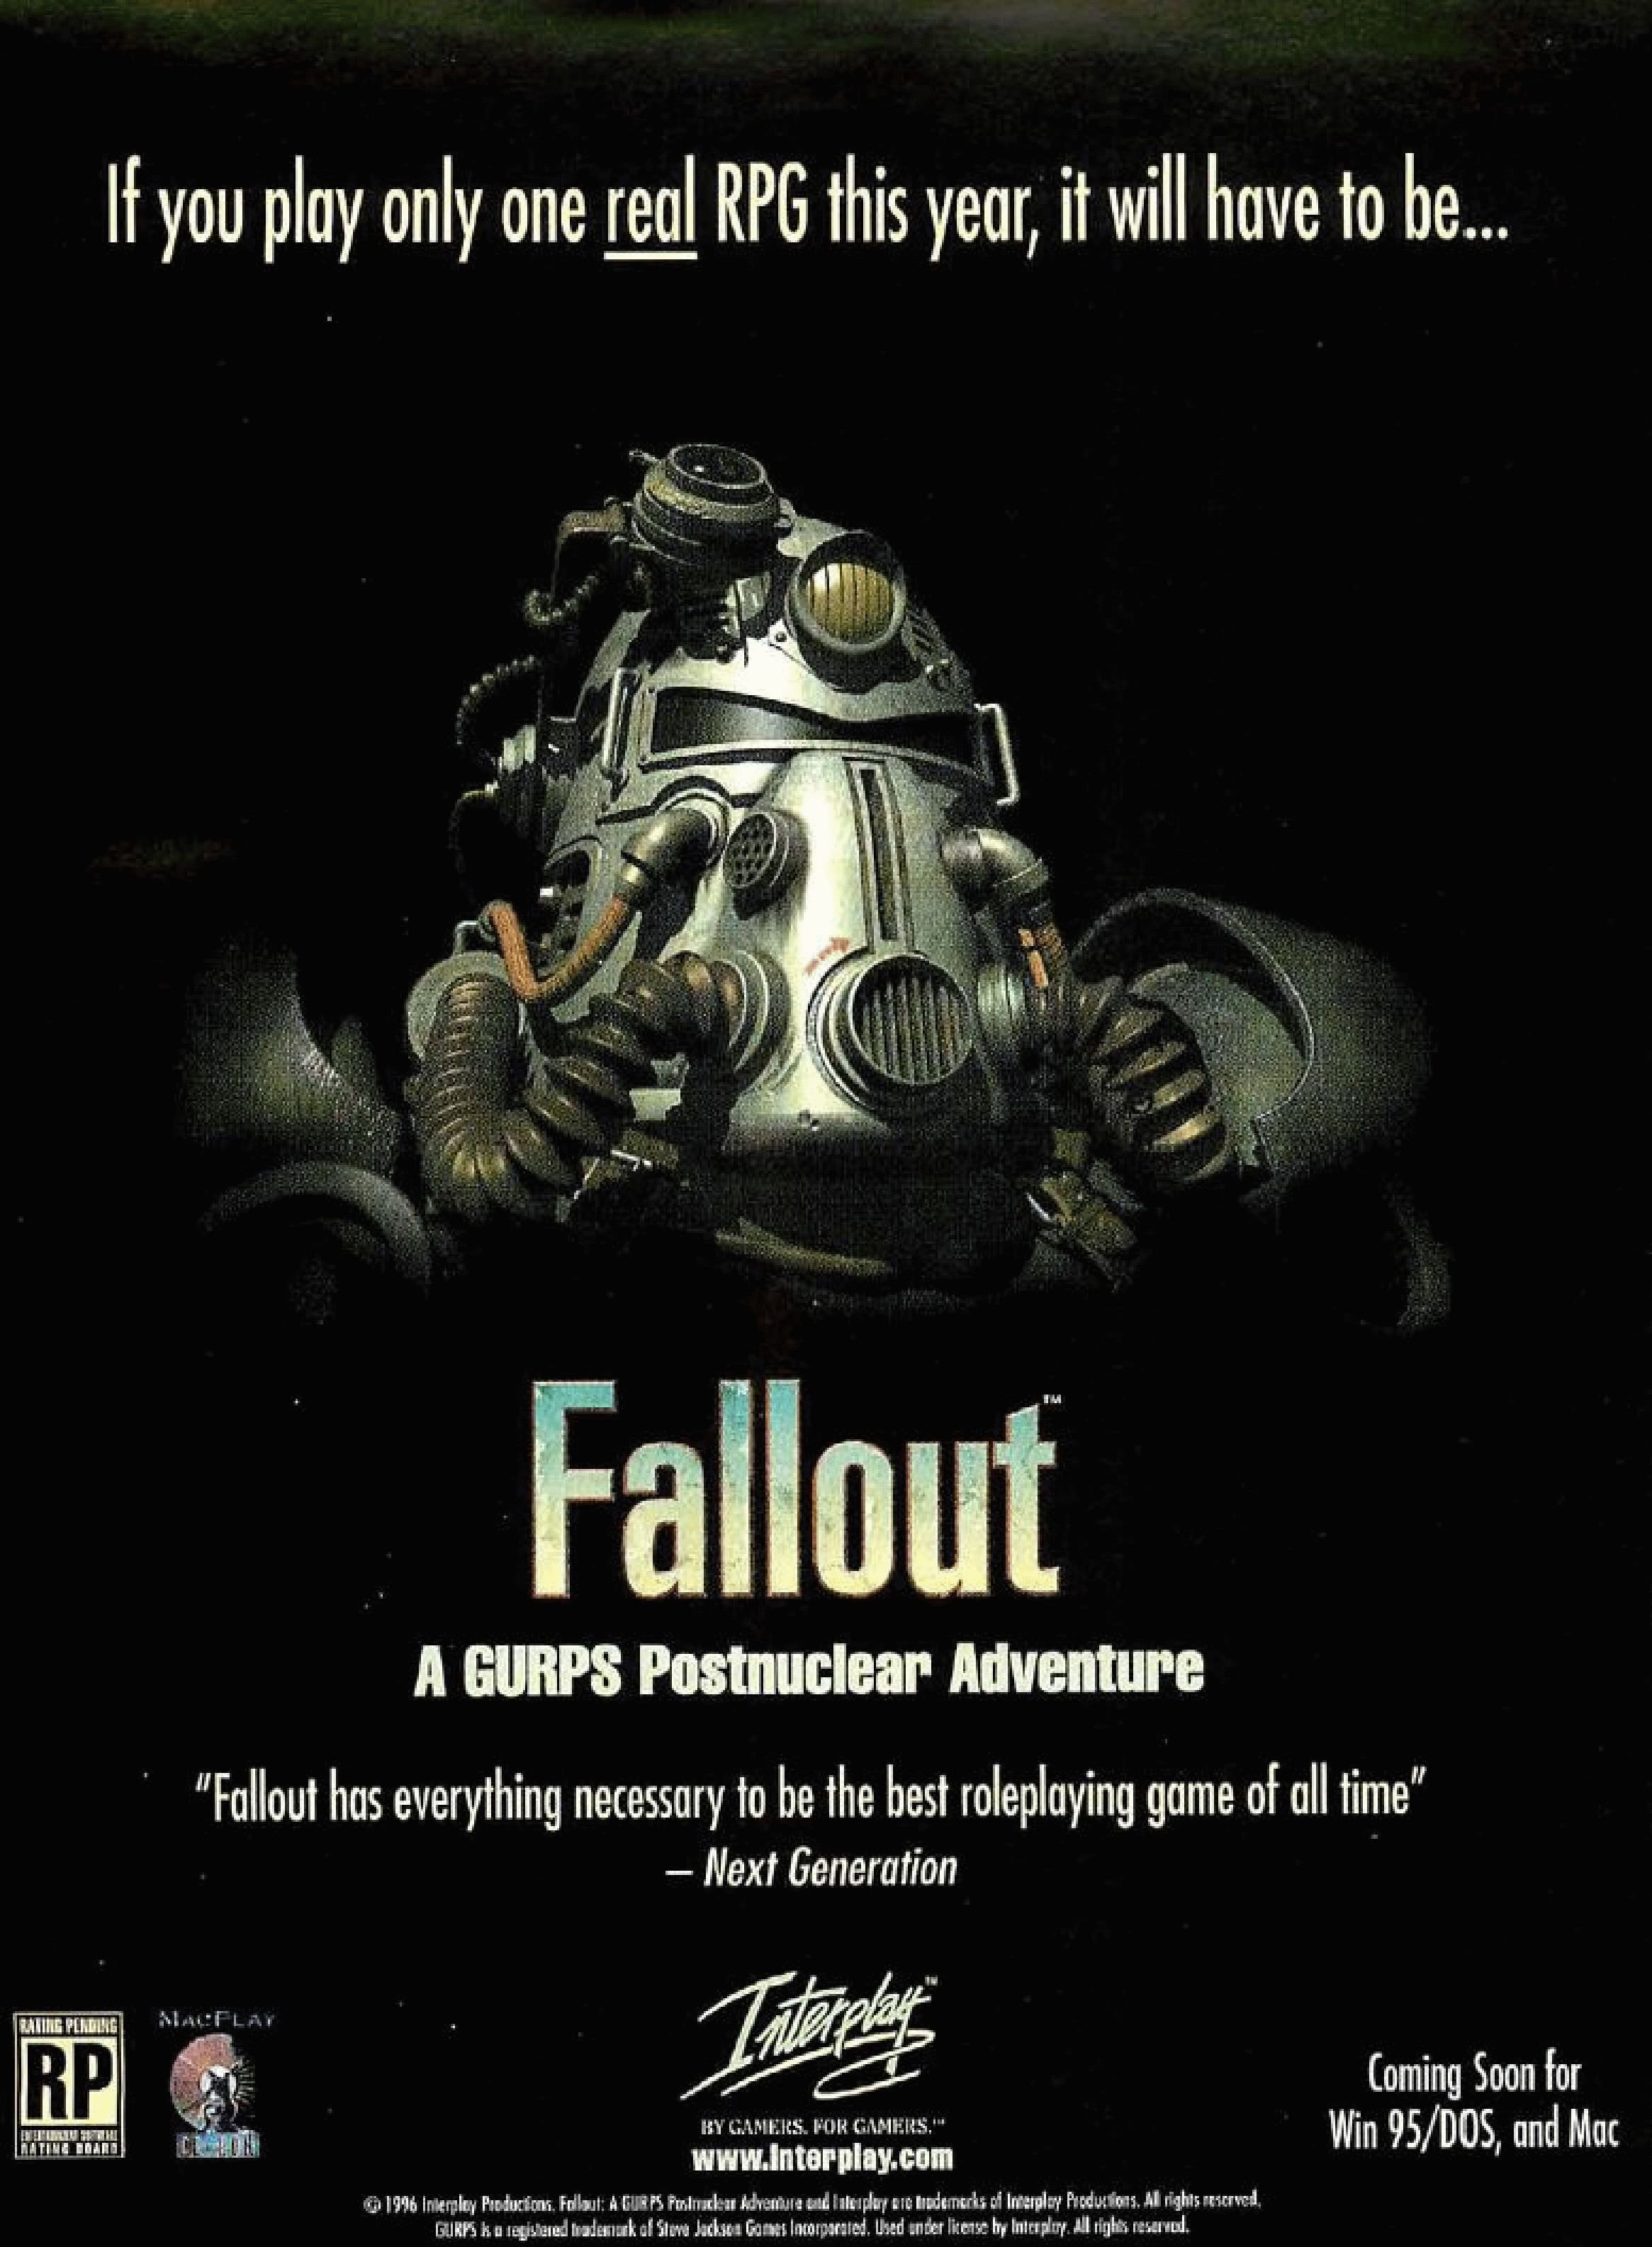 90s video game ads -  fallout 1 - If you play only one real Rpg this year, it will have to be... San Far Rp wa "Fallout has everything necessary to be the best roleplaying game of all time Next Generation Mala Fallout A Gurps Postnuclear Adventure Arab Ga